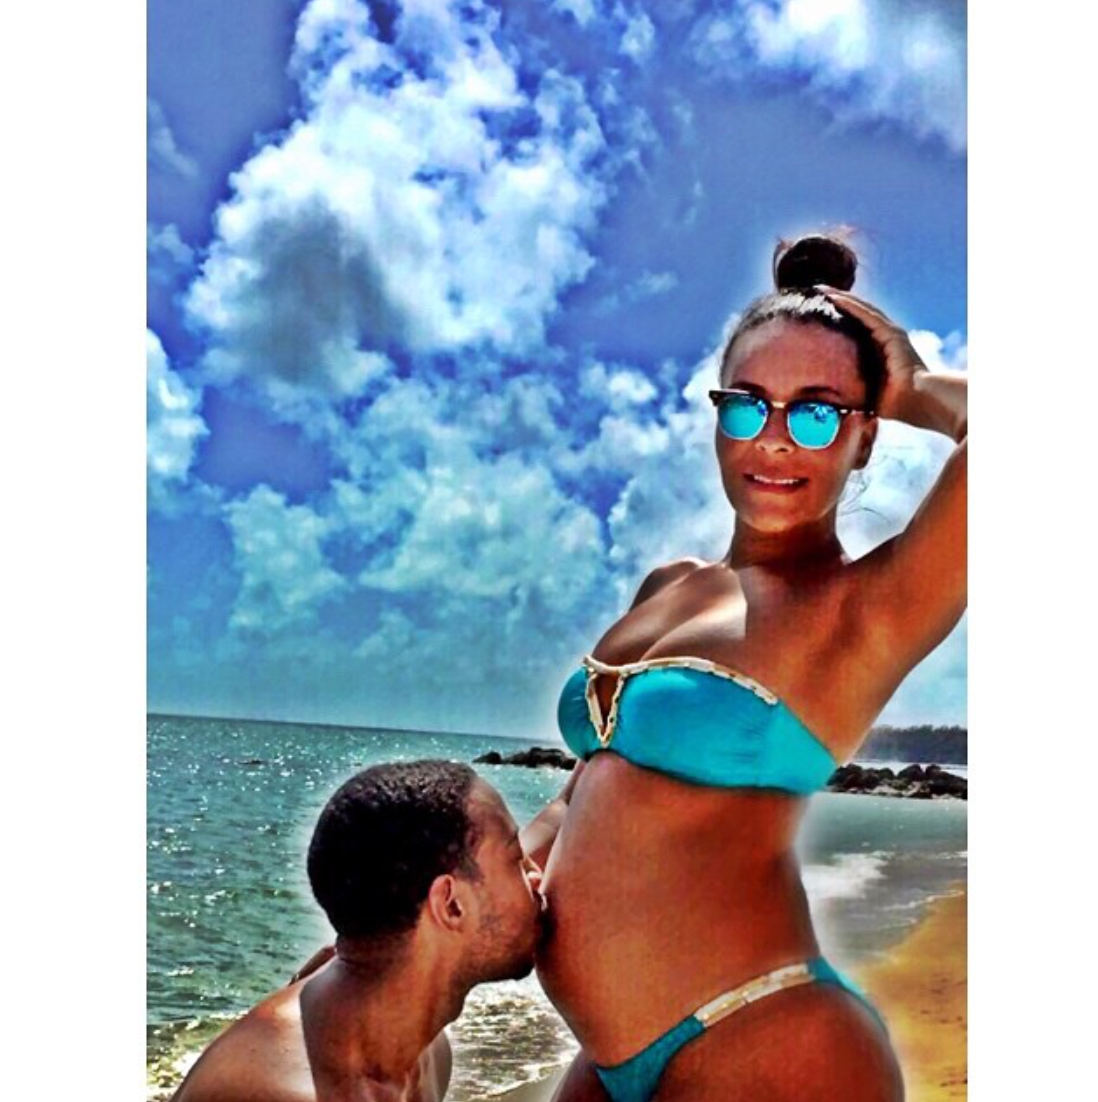 No One Does Baecations Quite Like Ludacris And His Wife Eudoxie
